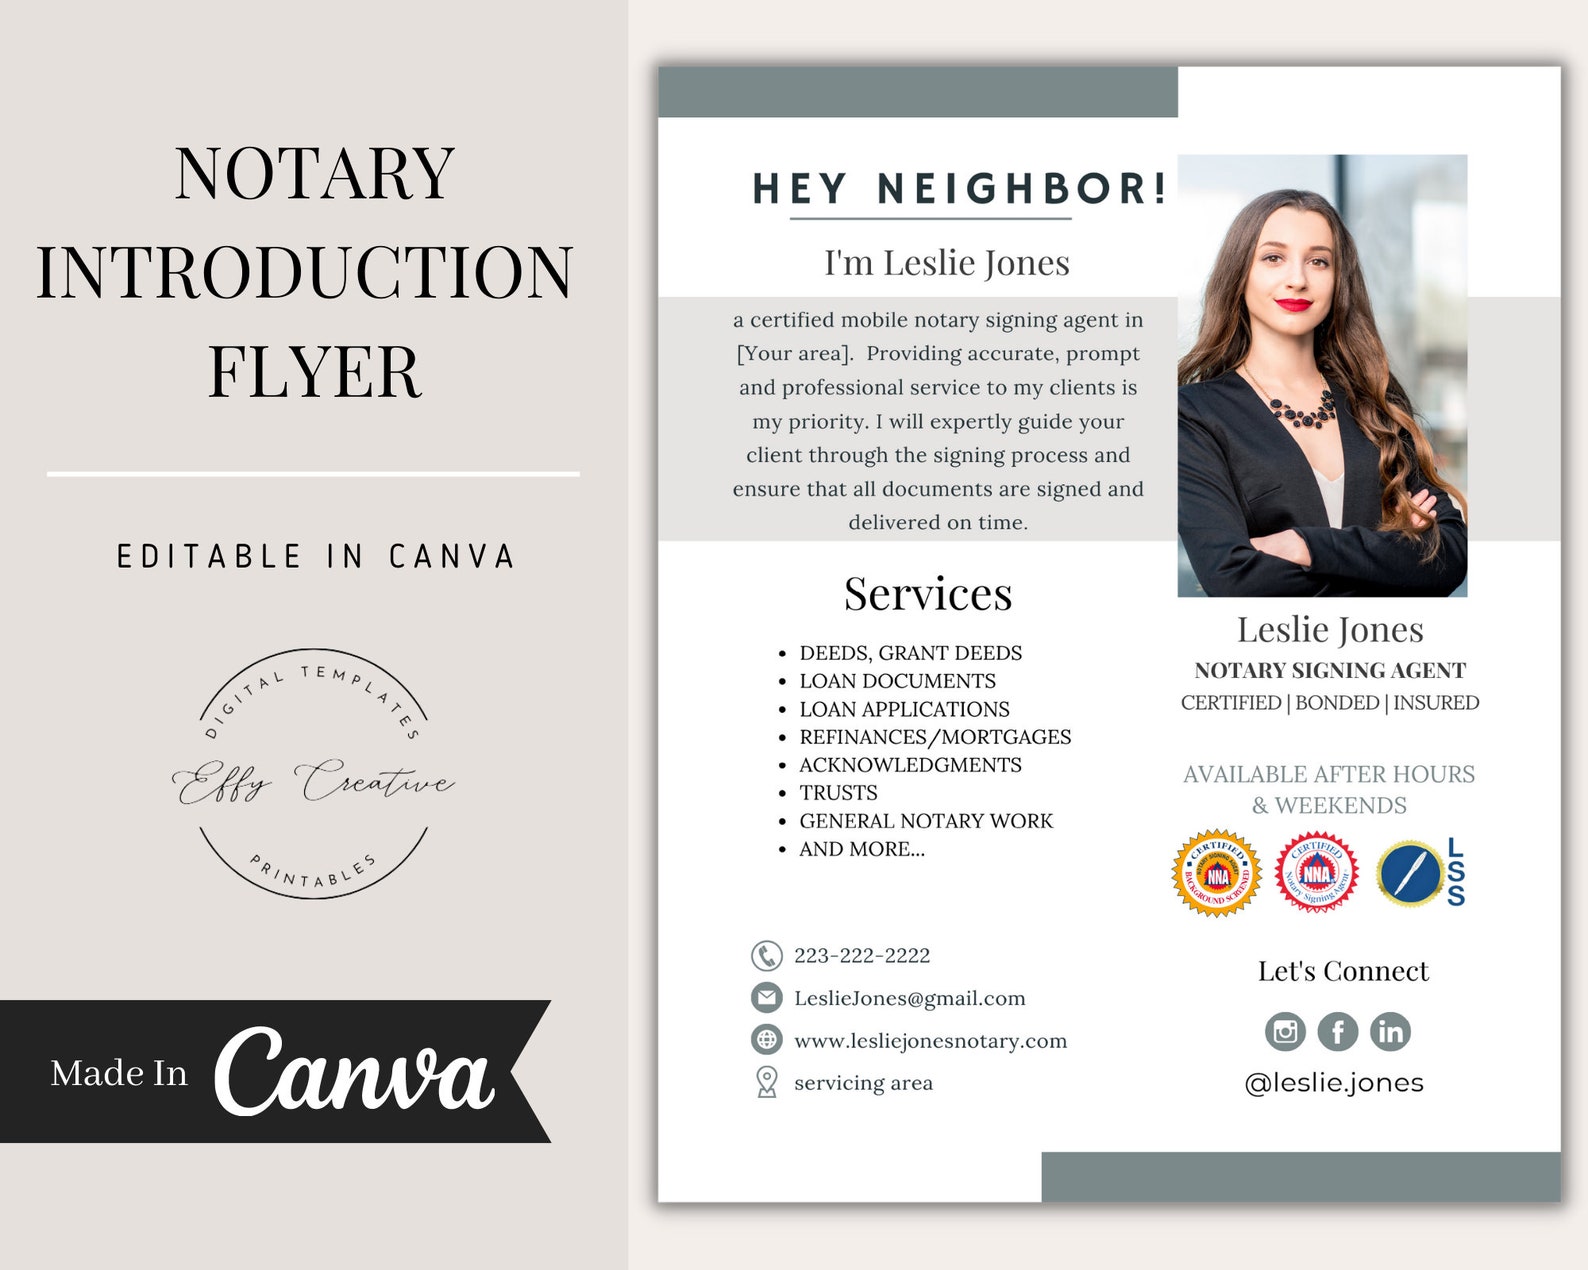 Notary Flyer Template Notary Introduction Flyer Marketing Etsy